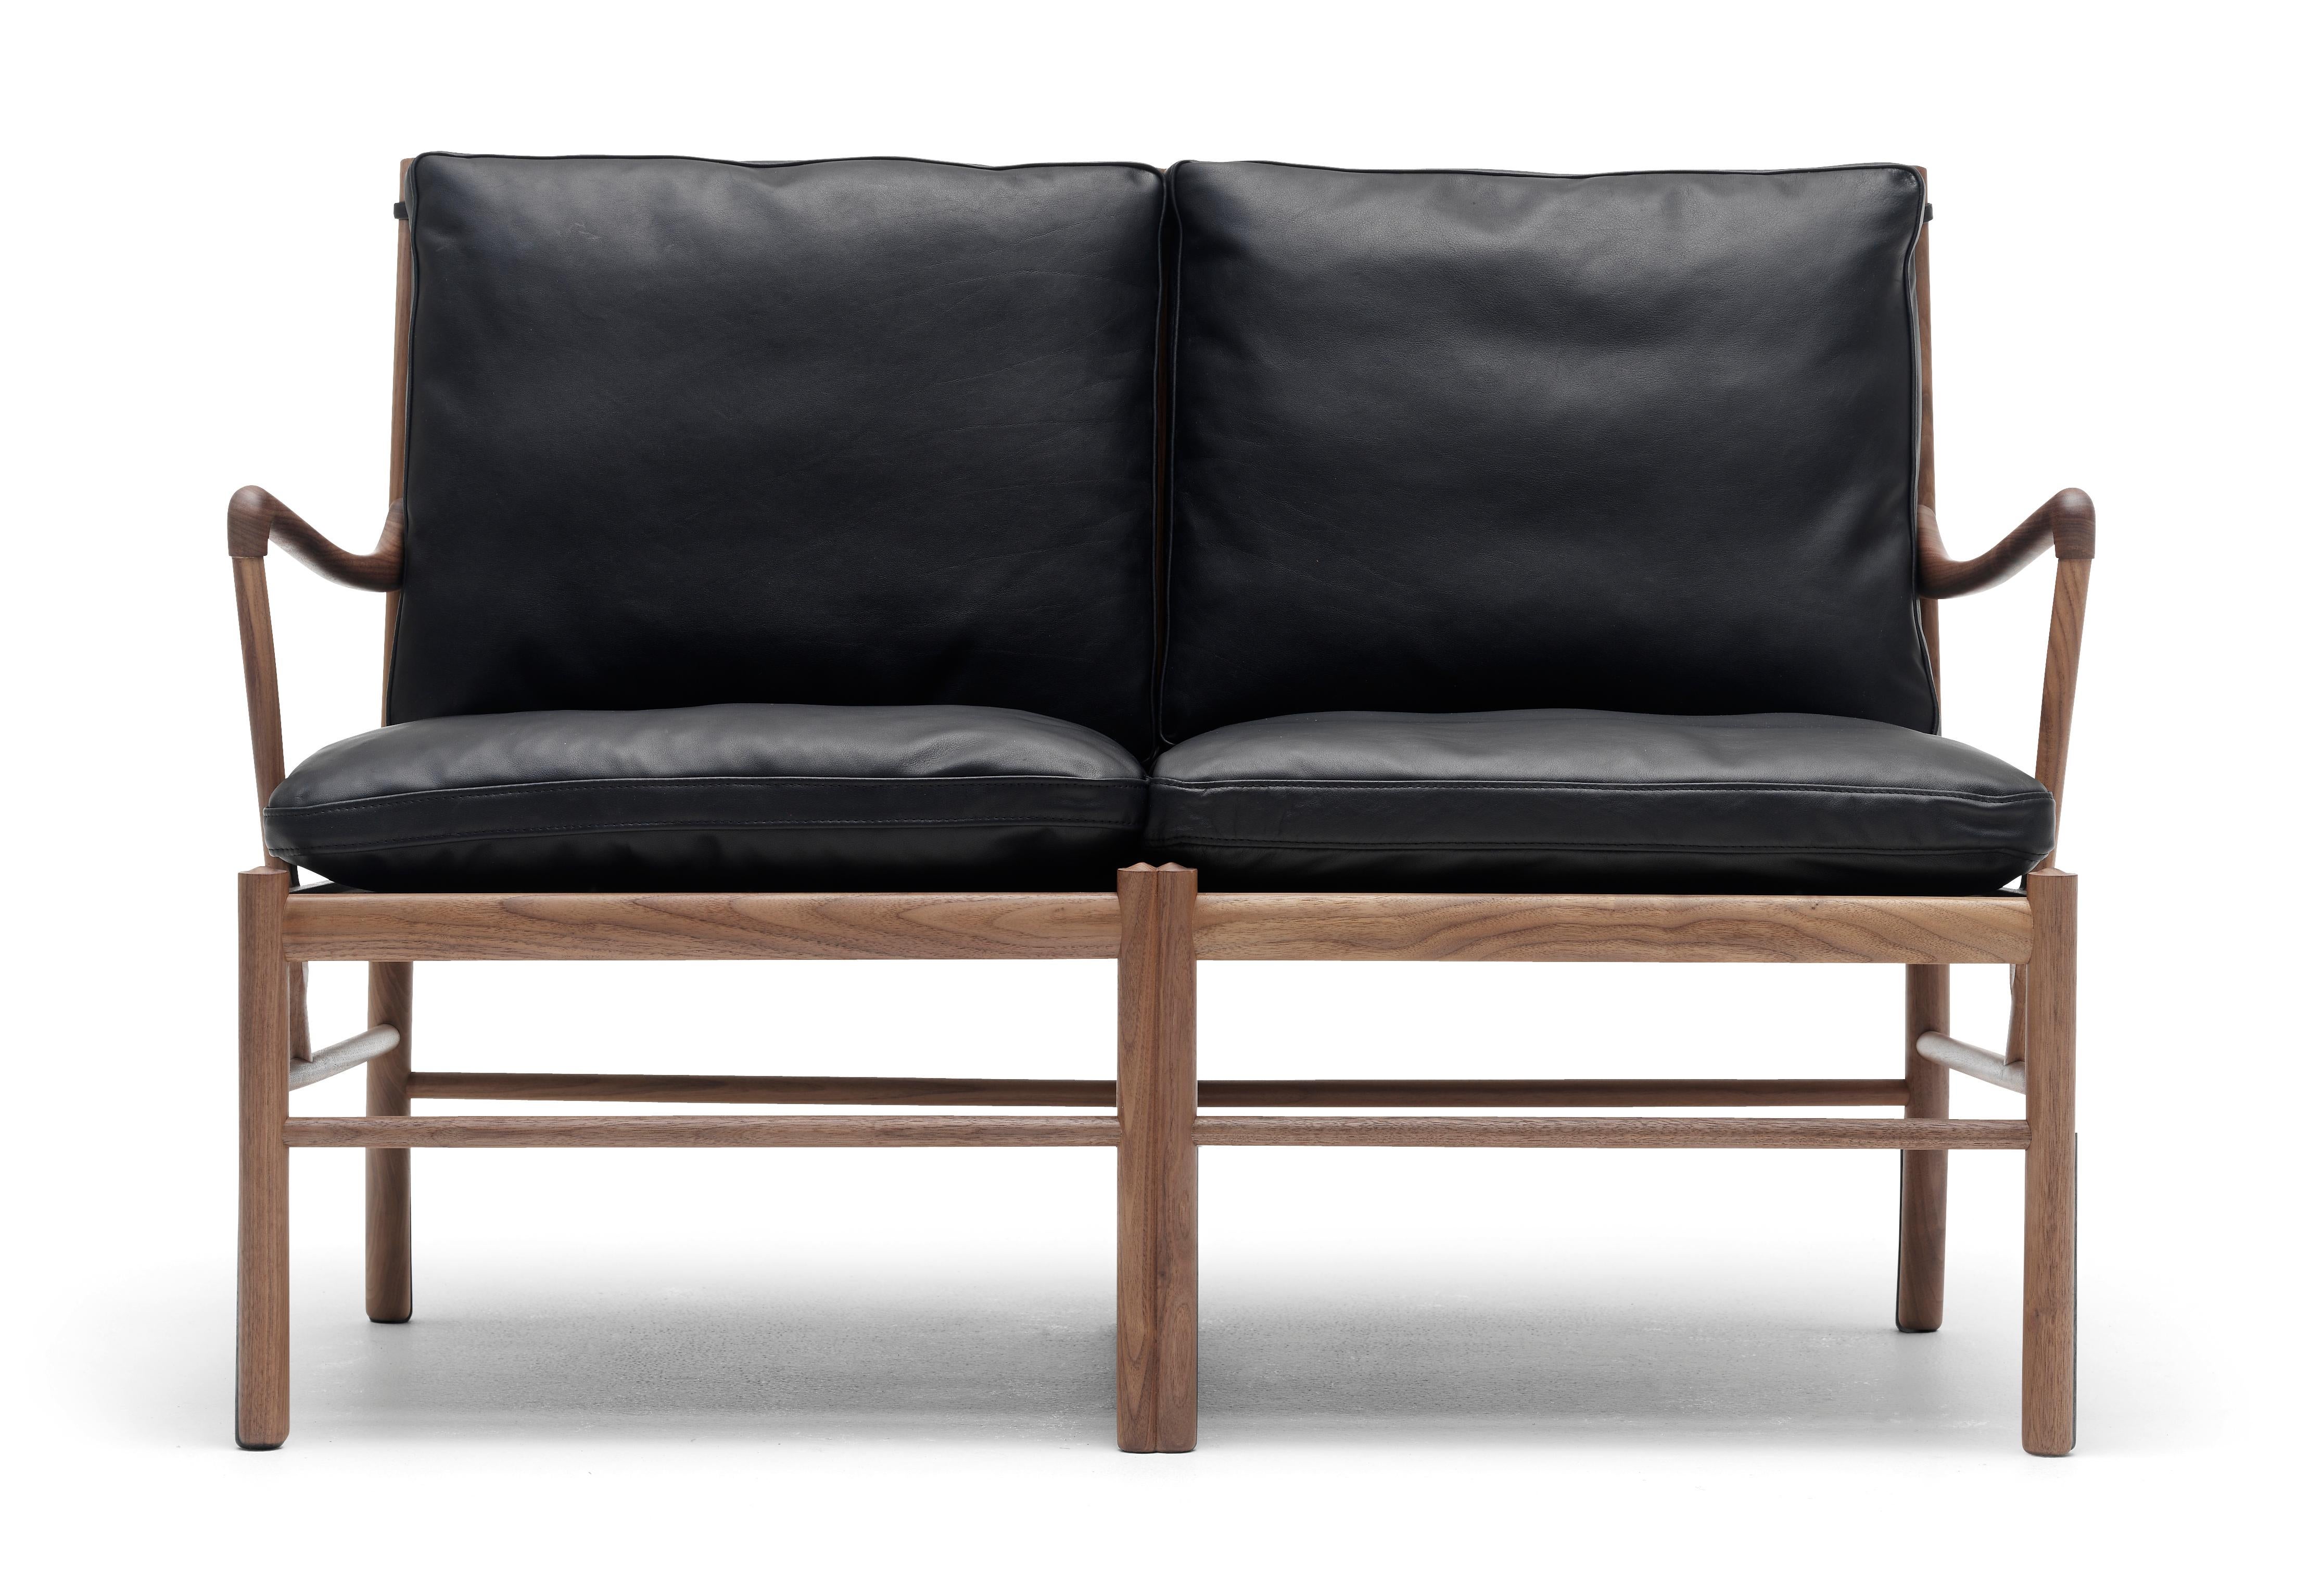 Black (Sif 98) OW149-2 Colonial Sofa in Walnut Oil by Ole Wanscher